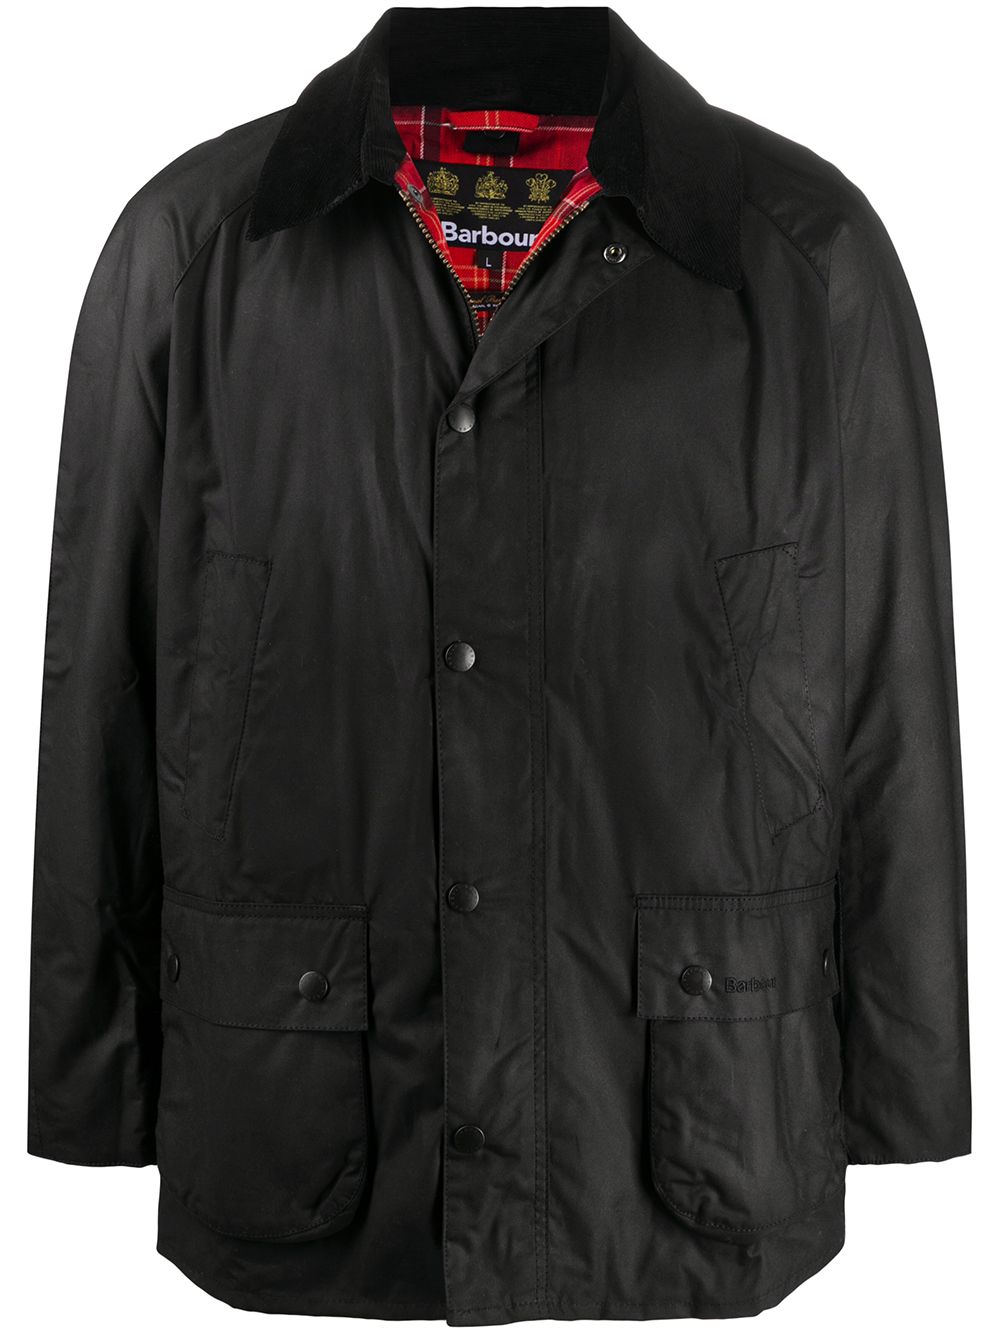 Barbour куртка Ashby от Barbour